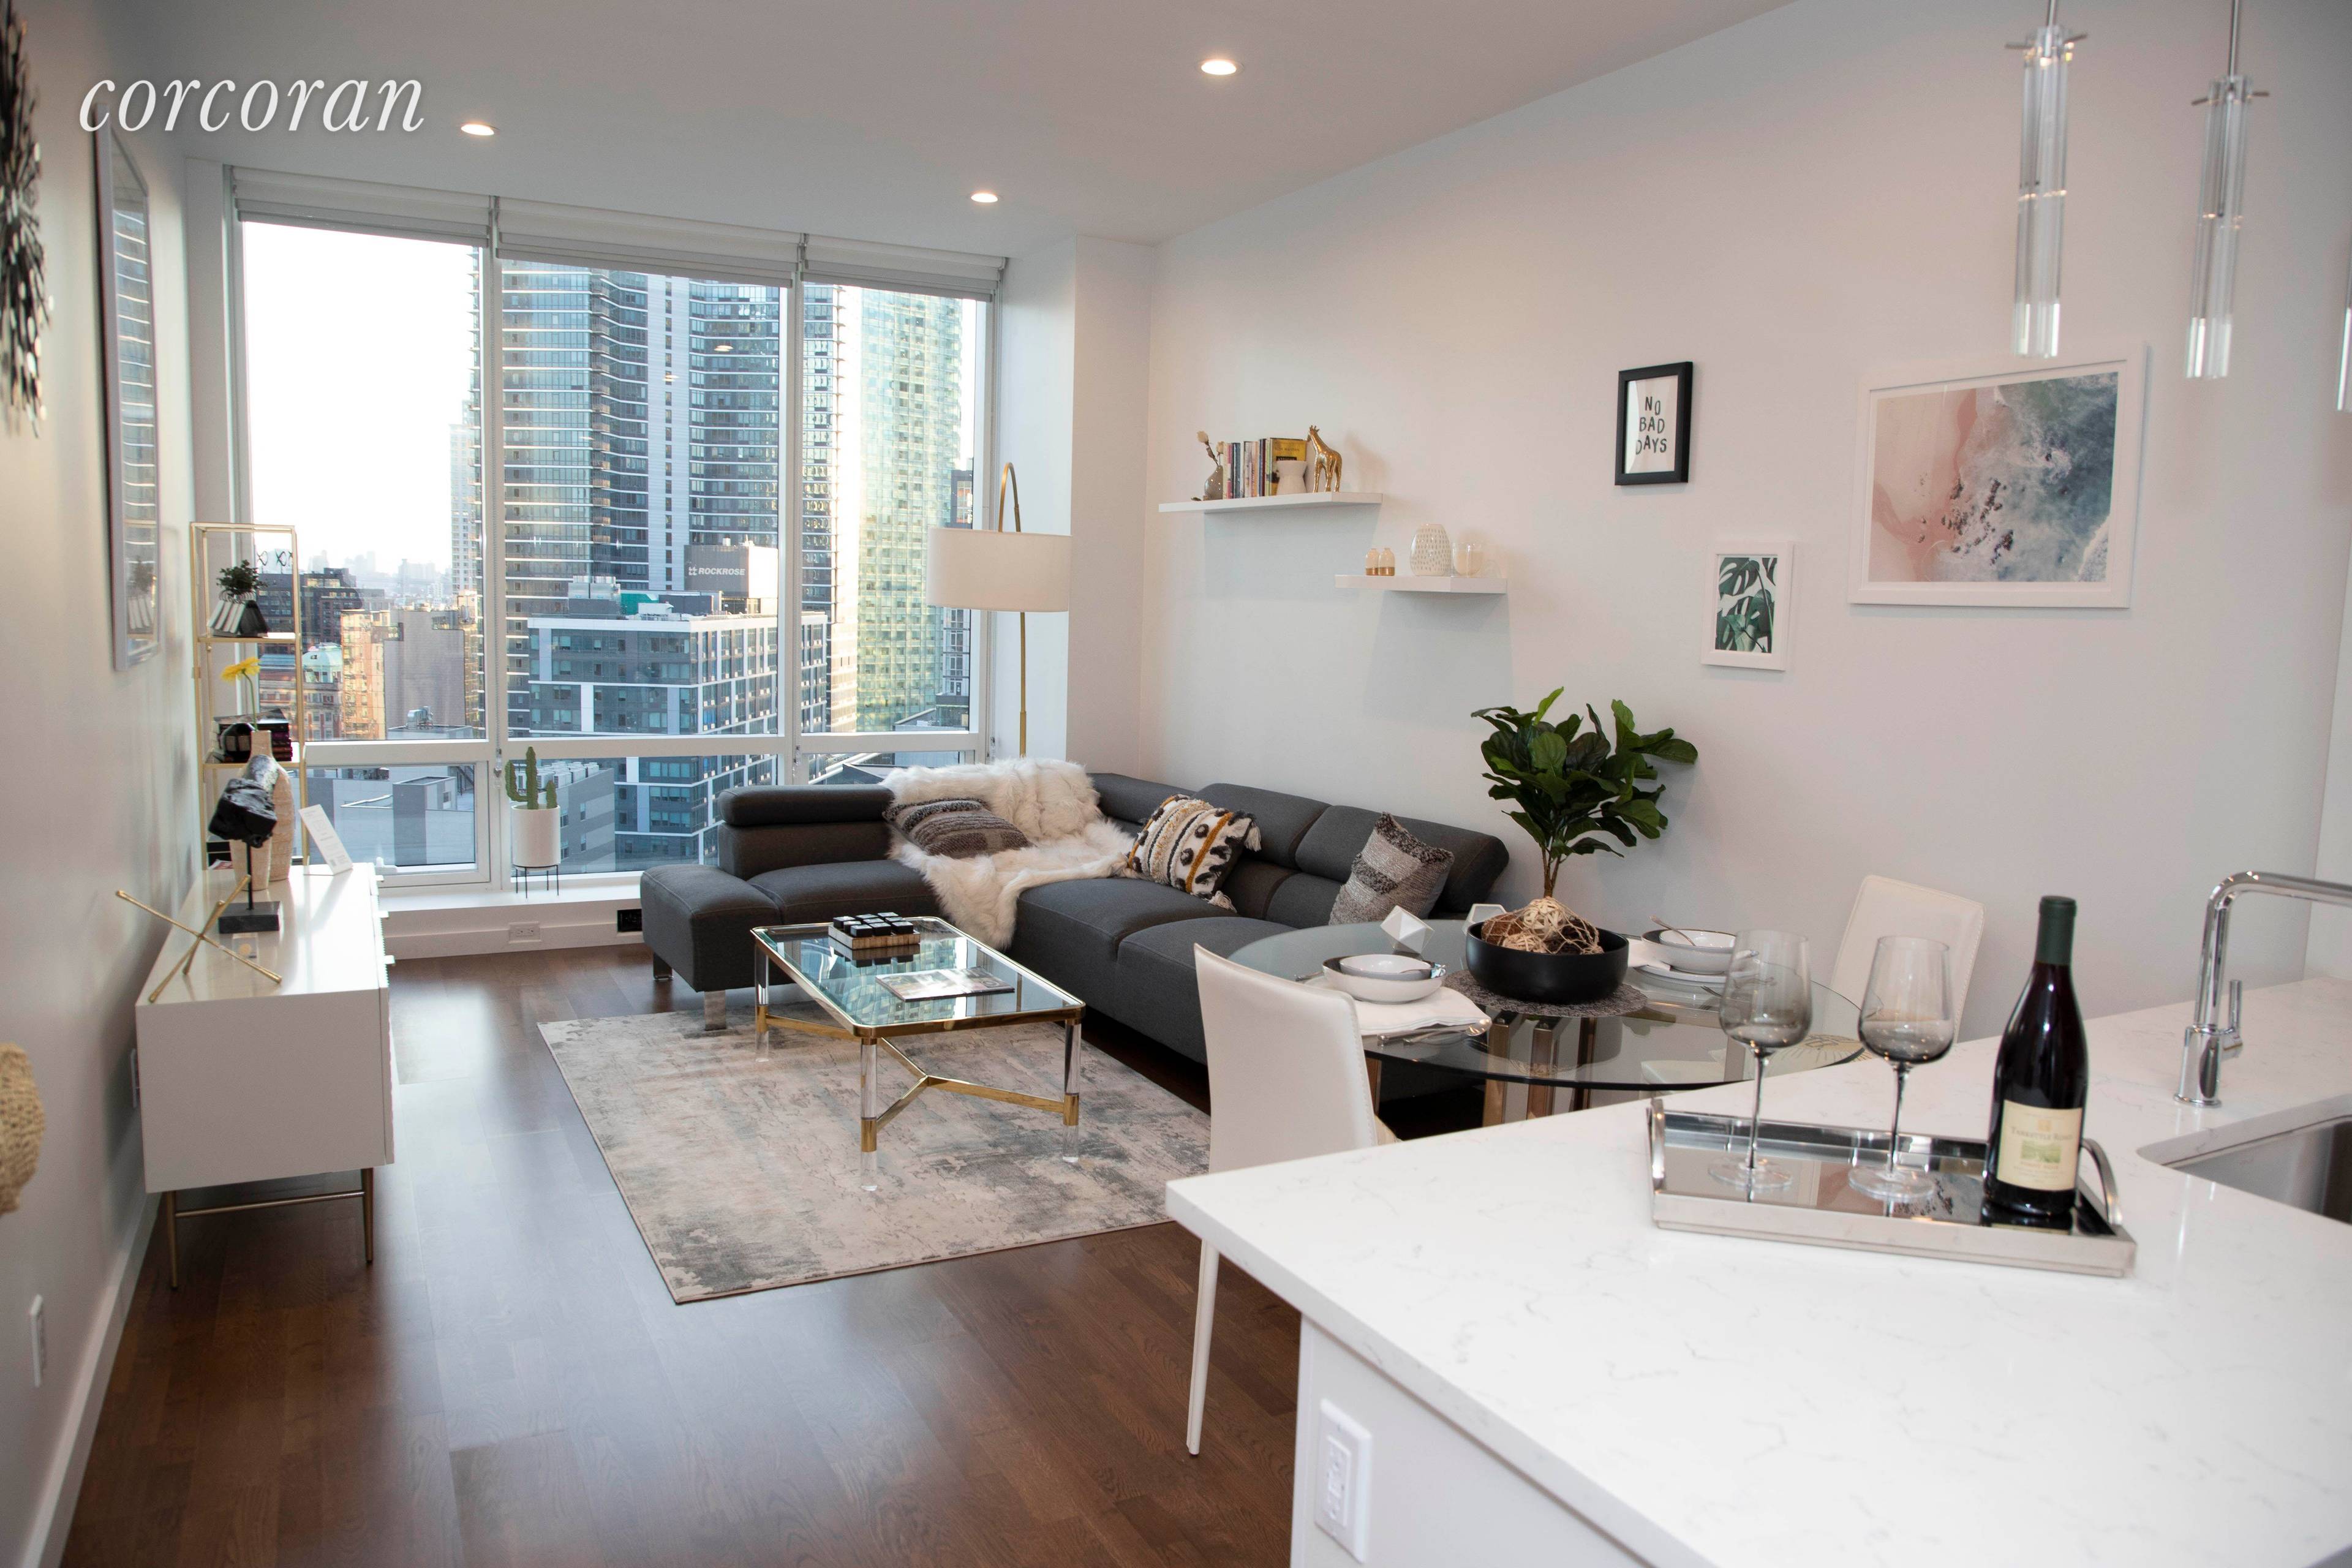 SPACIOUS 1 BED 1 BATH WITH A 15 YEAR TAX ABATEMENT Set in the heart of vibrant Long Island City, Star Tower combines sleek modern design, thoughtful space, and graceful ...